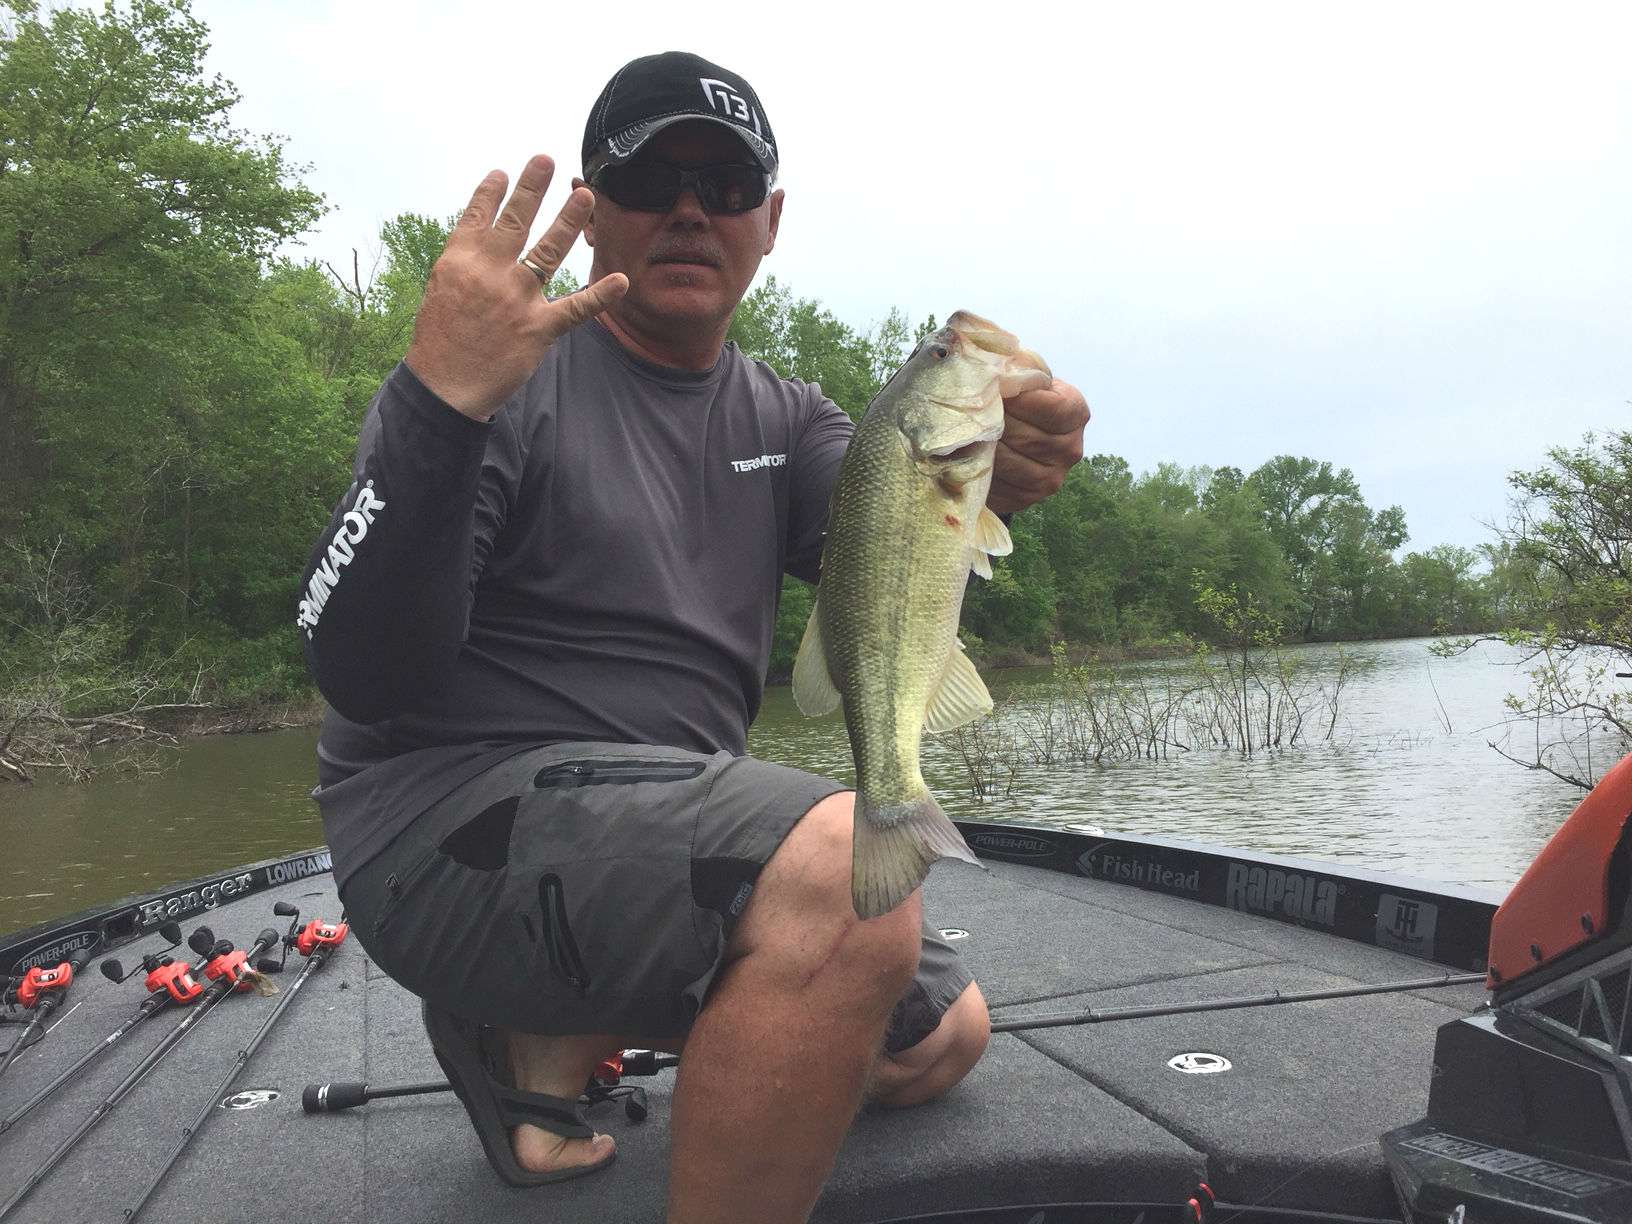 A nice little chunk in the boat for Dave Lefebre.